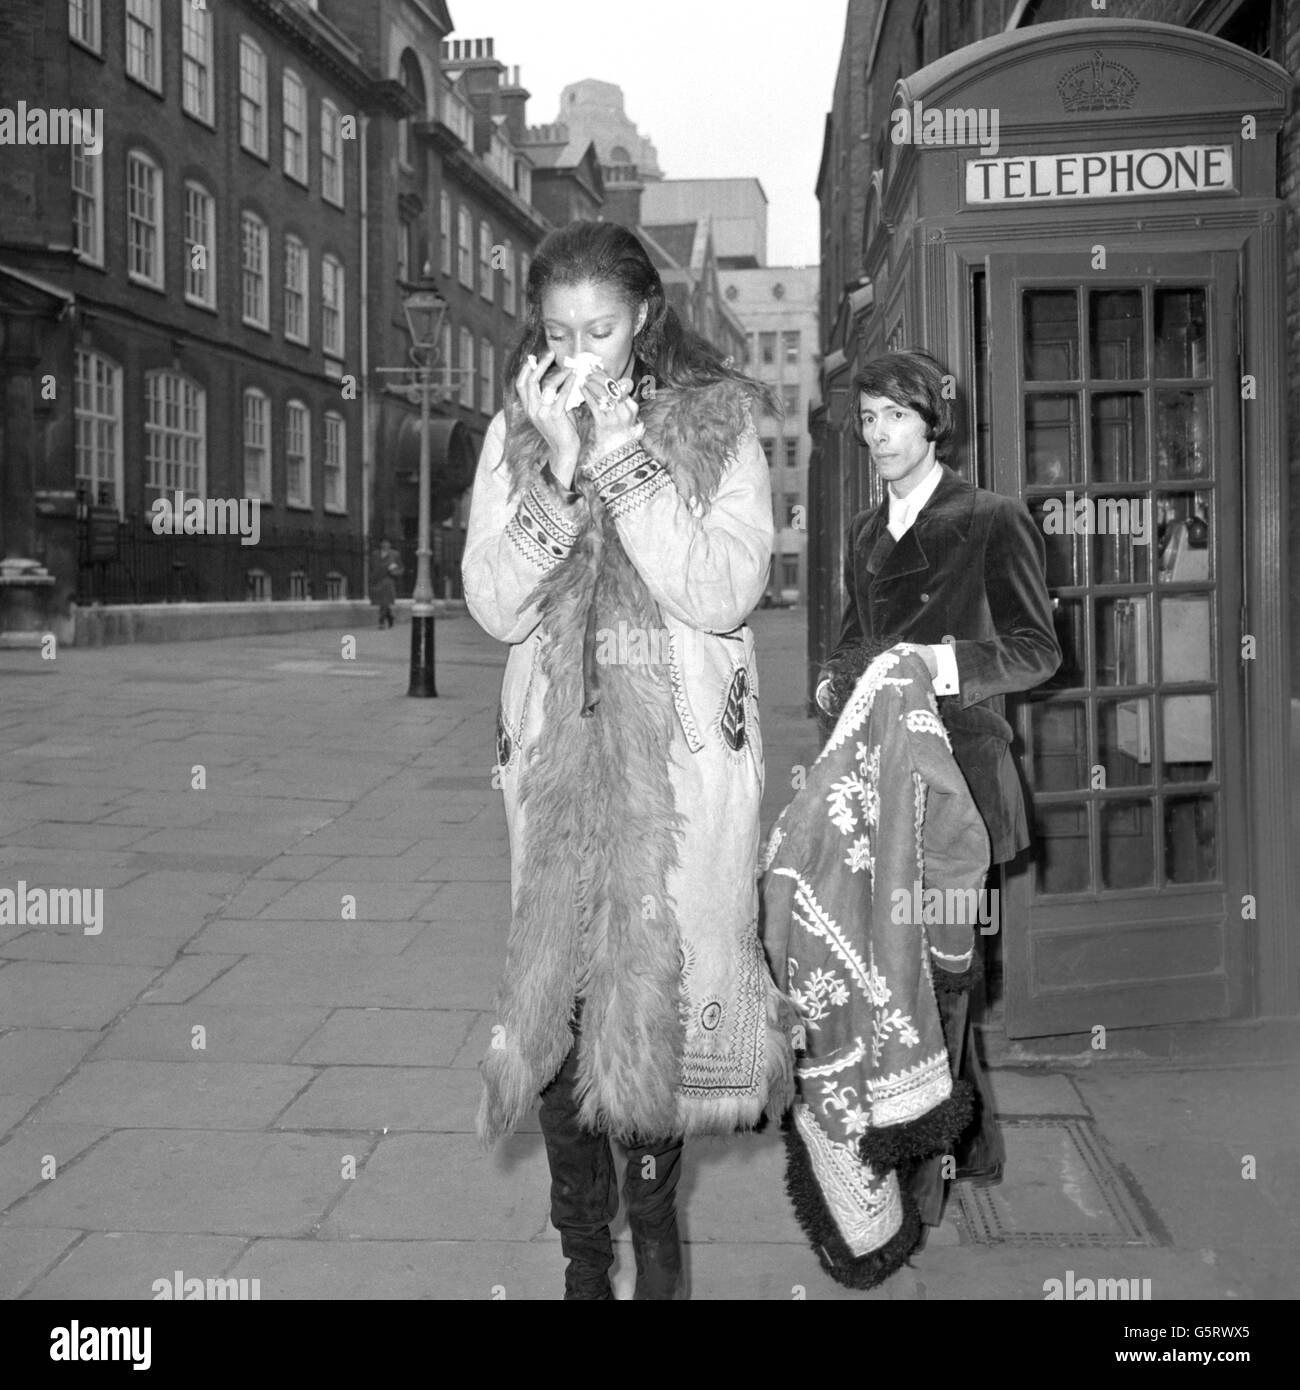 American model Donyale Luna blows her nose on a tissue while in London with American journalist Steve Brandt. Their Canadian-born actor-producer friend Iain Quarrier (not pictured) is due to appear at Bow Street (London) Court after being charged for obstructing the police. Stock Photo